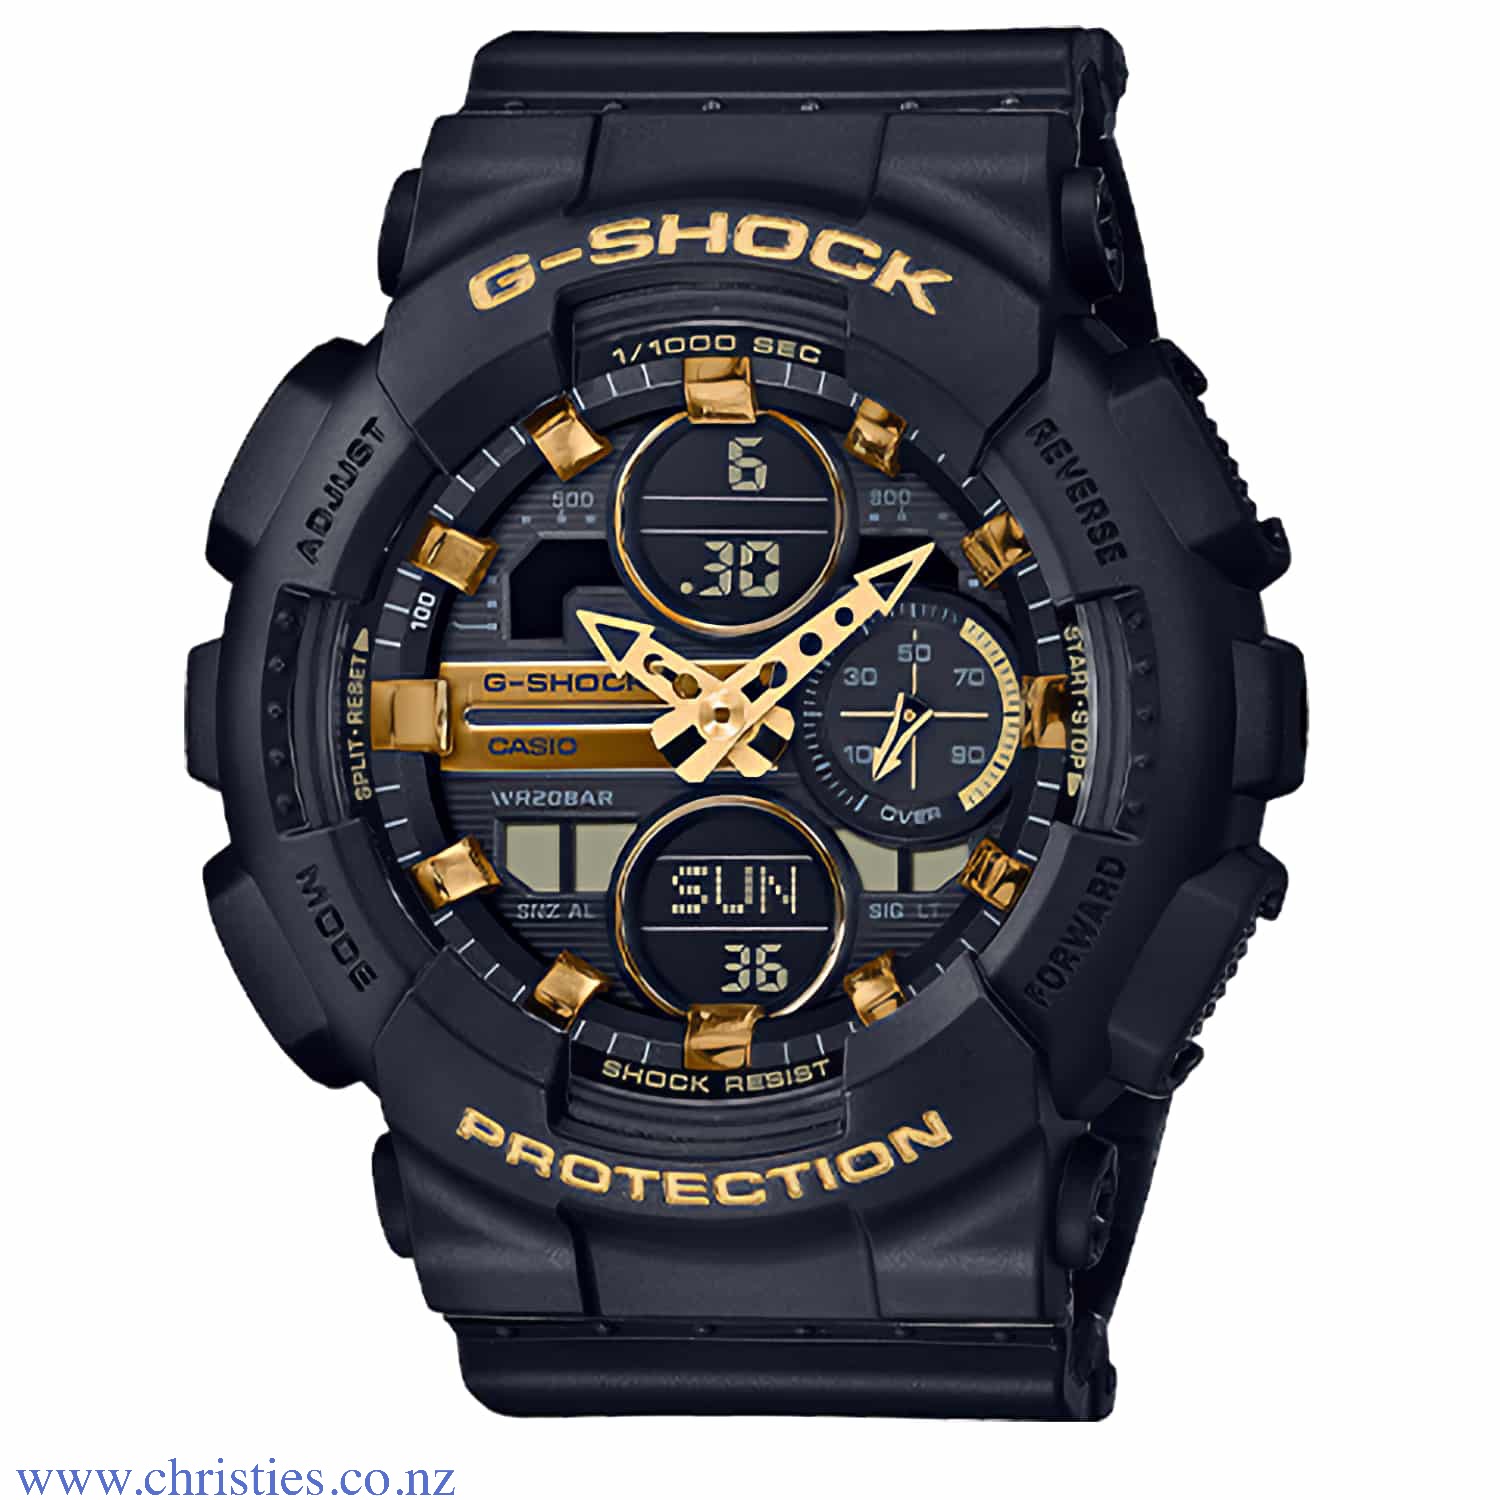 GMAS140M-1A Casio G-SHOCK  Womens Series Watch. Introducing new compact G-SHOCK models that are great choices for women who prefer G-SHOCK styling. These new models represent a down-sizing of the popular GA140. 2 Year Casio Guarantee which is only availab